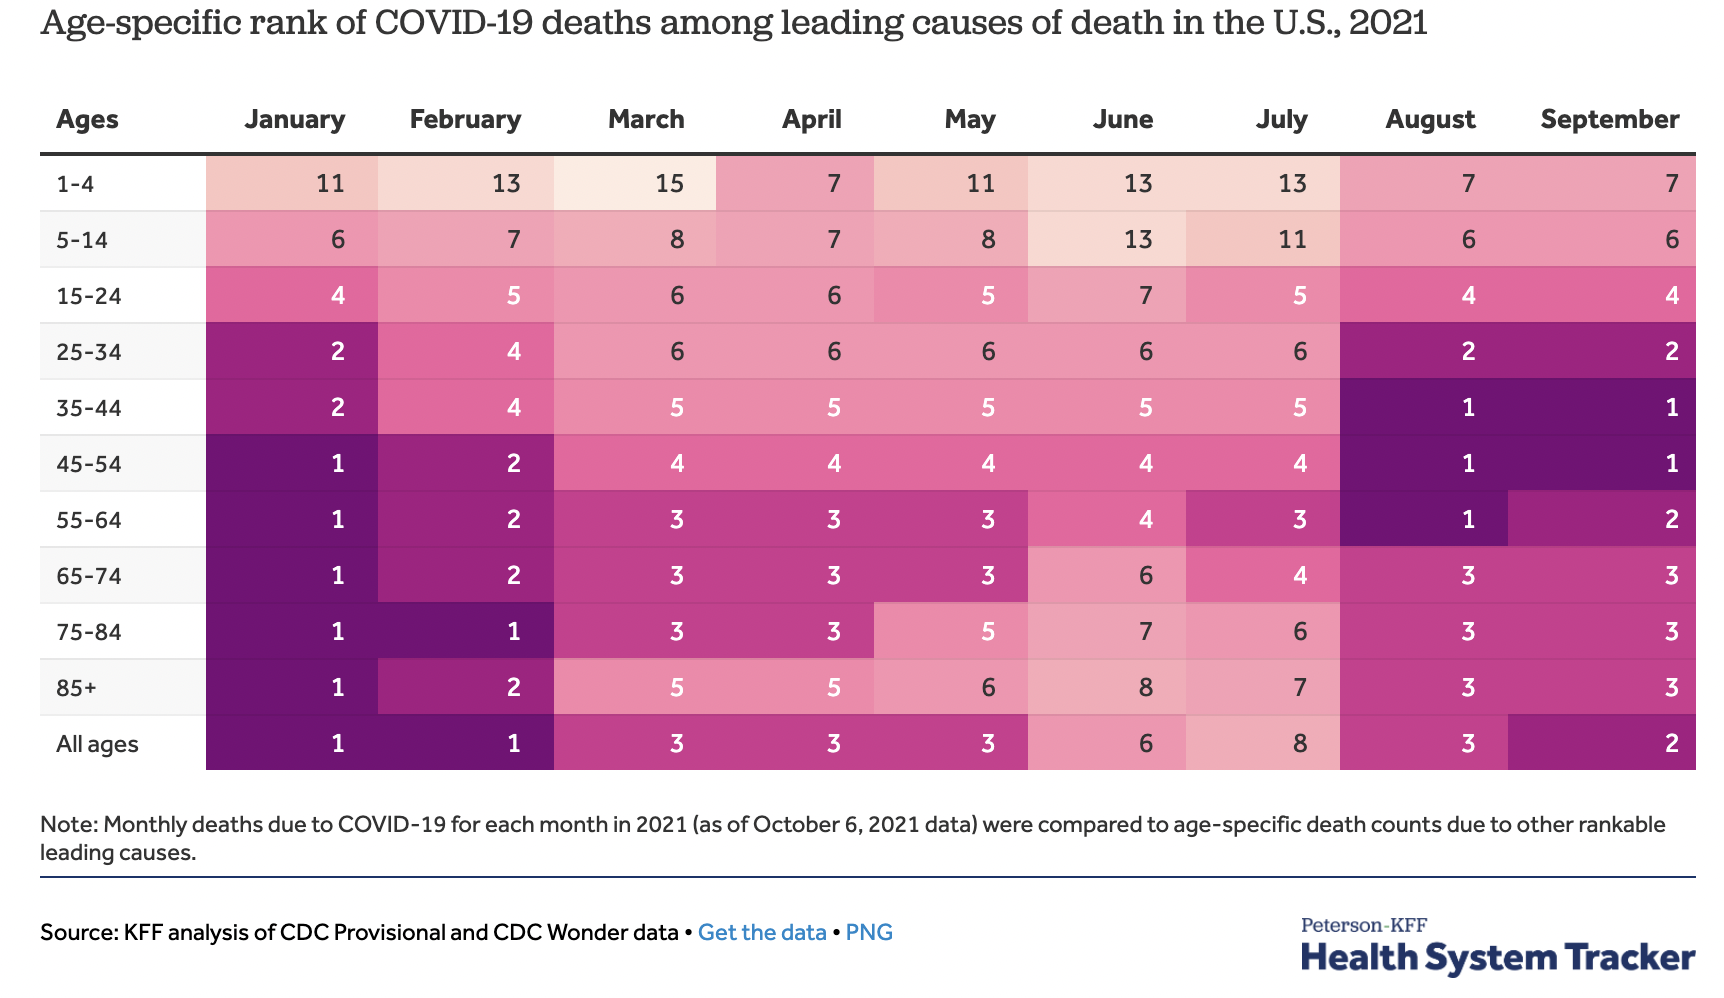 COVID-19 Deaths by Age